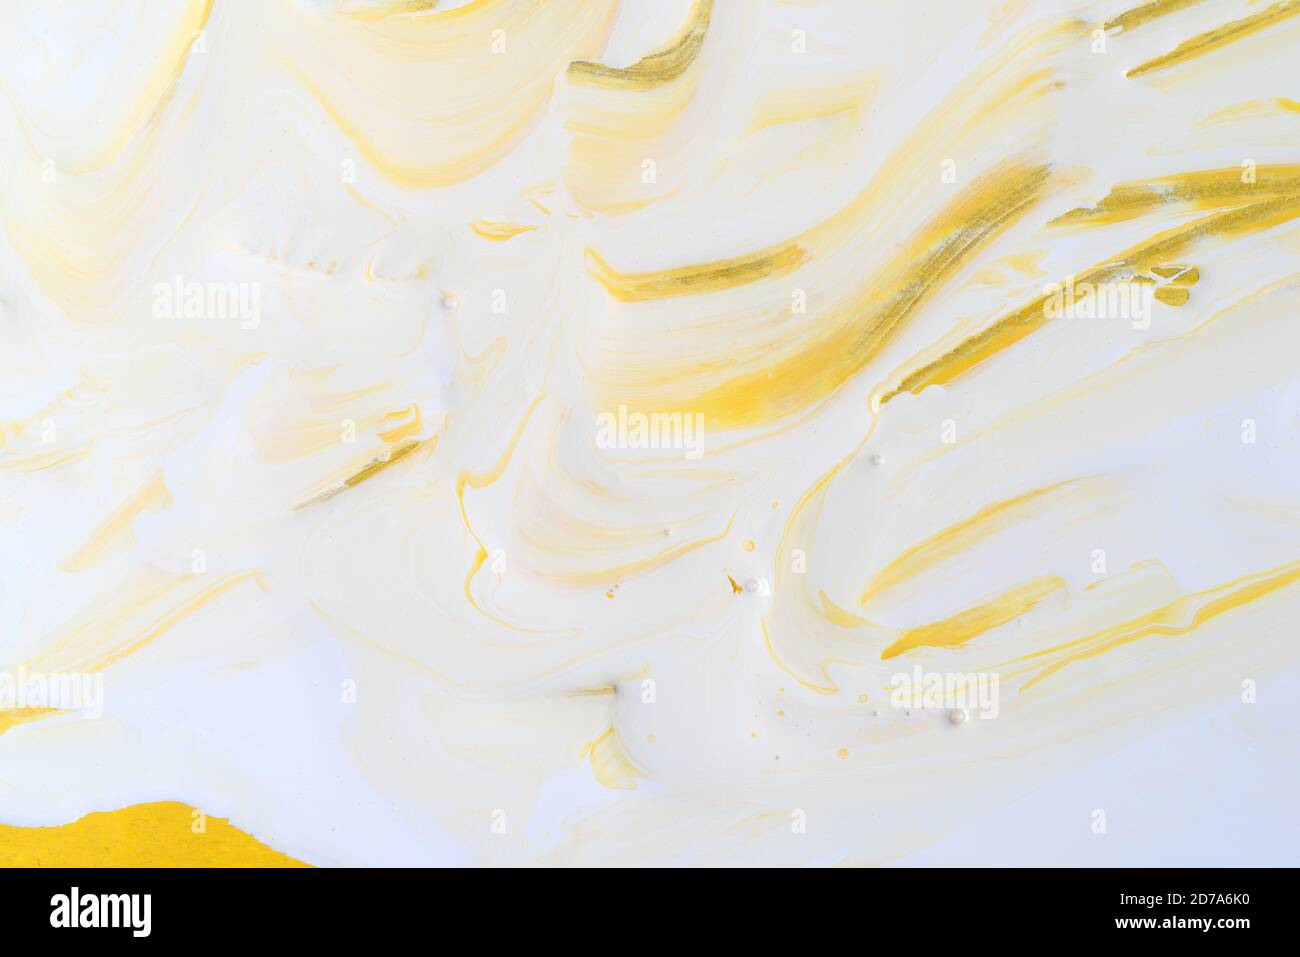 Close view of a background with wet and thick white and yellow paint. Stock Photo